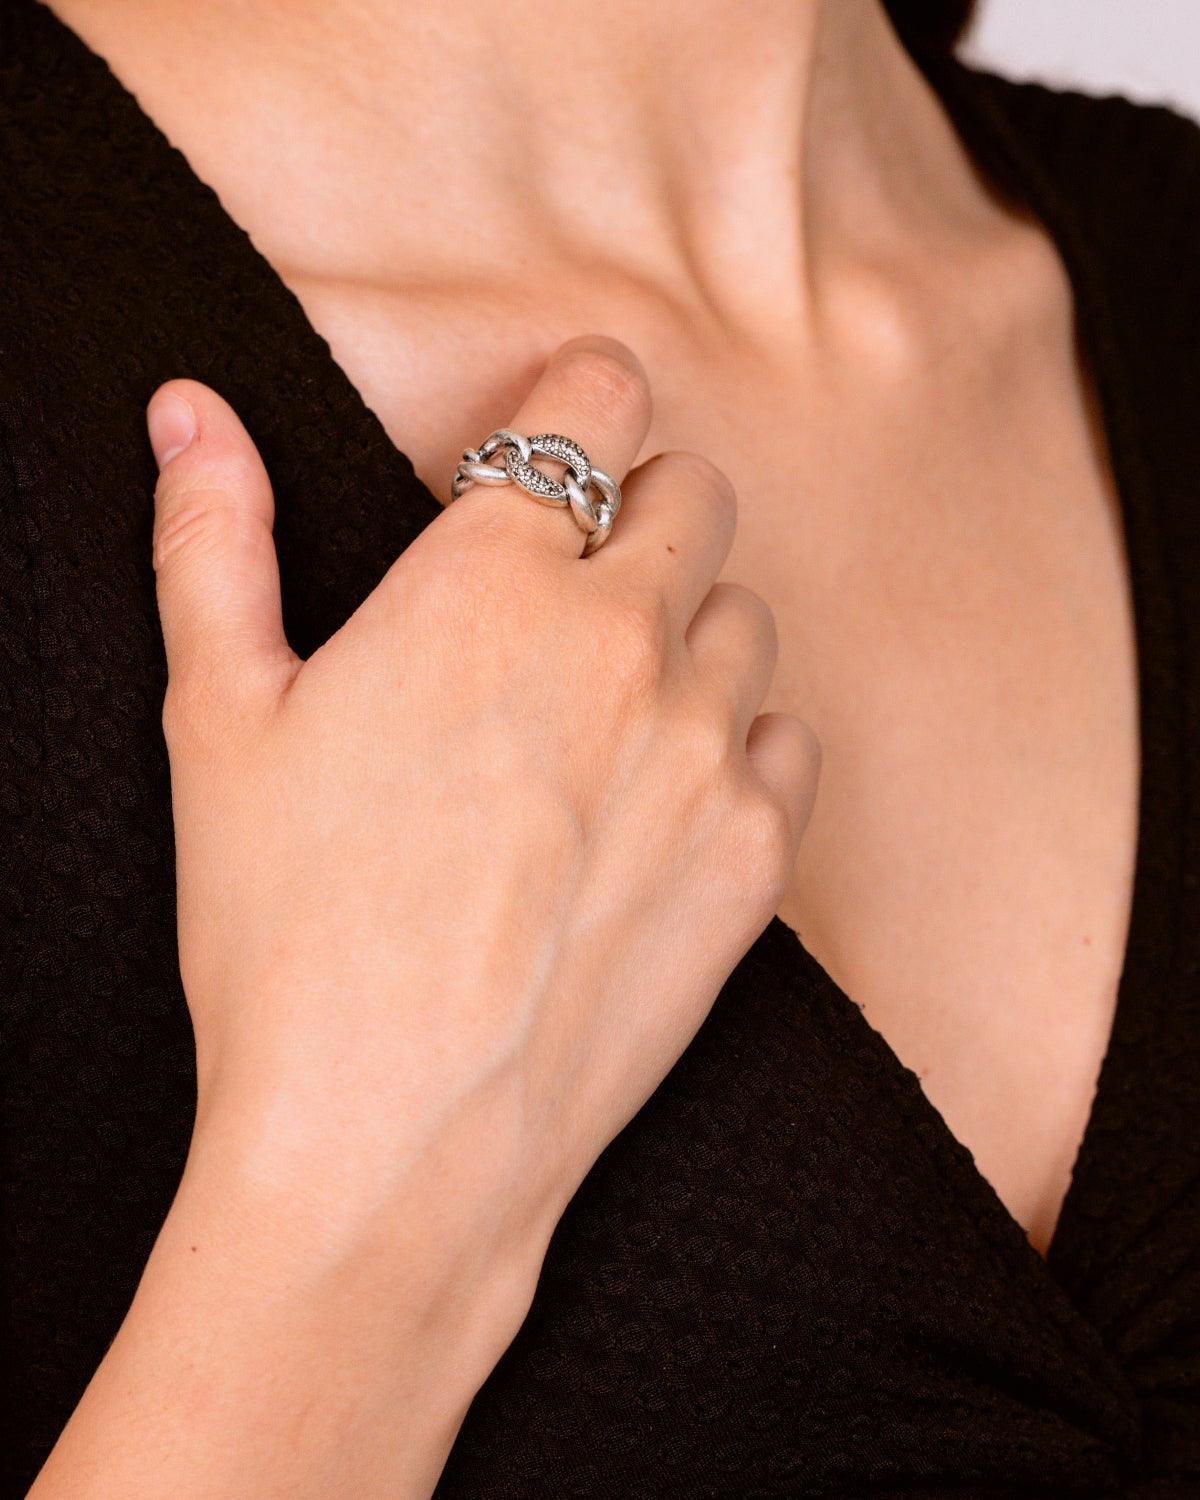 BURNISHED SILVER CHAINED RING - 8 Other Reasons